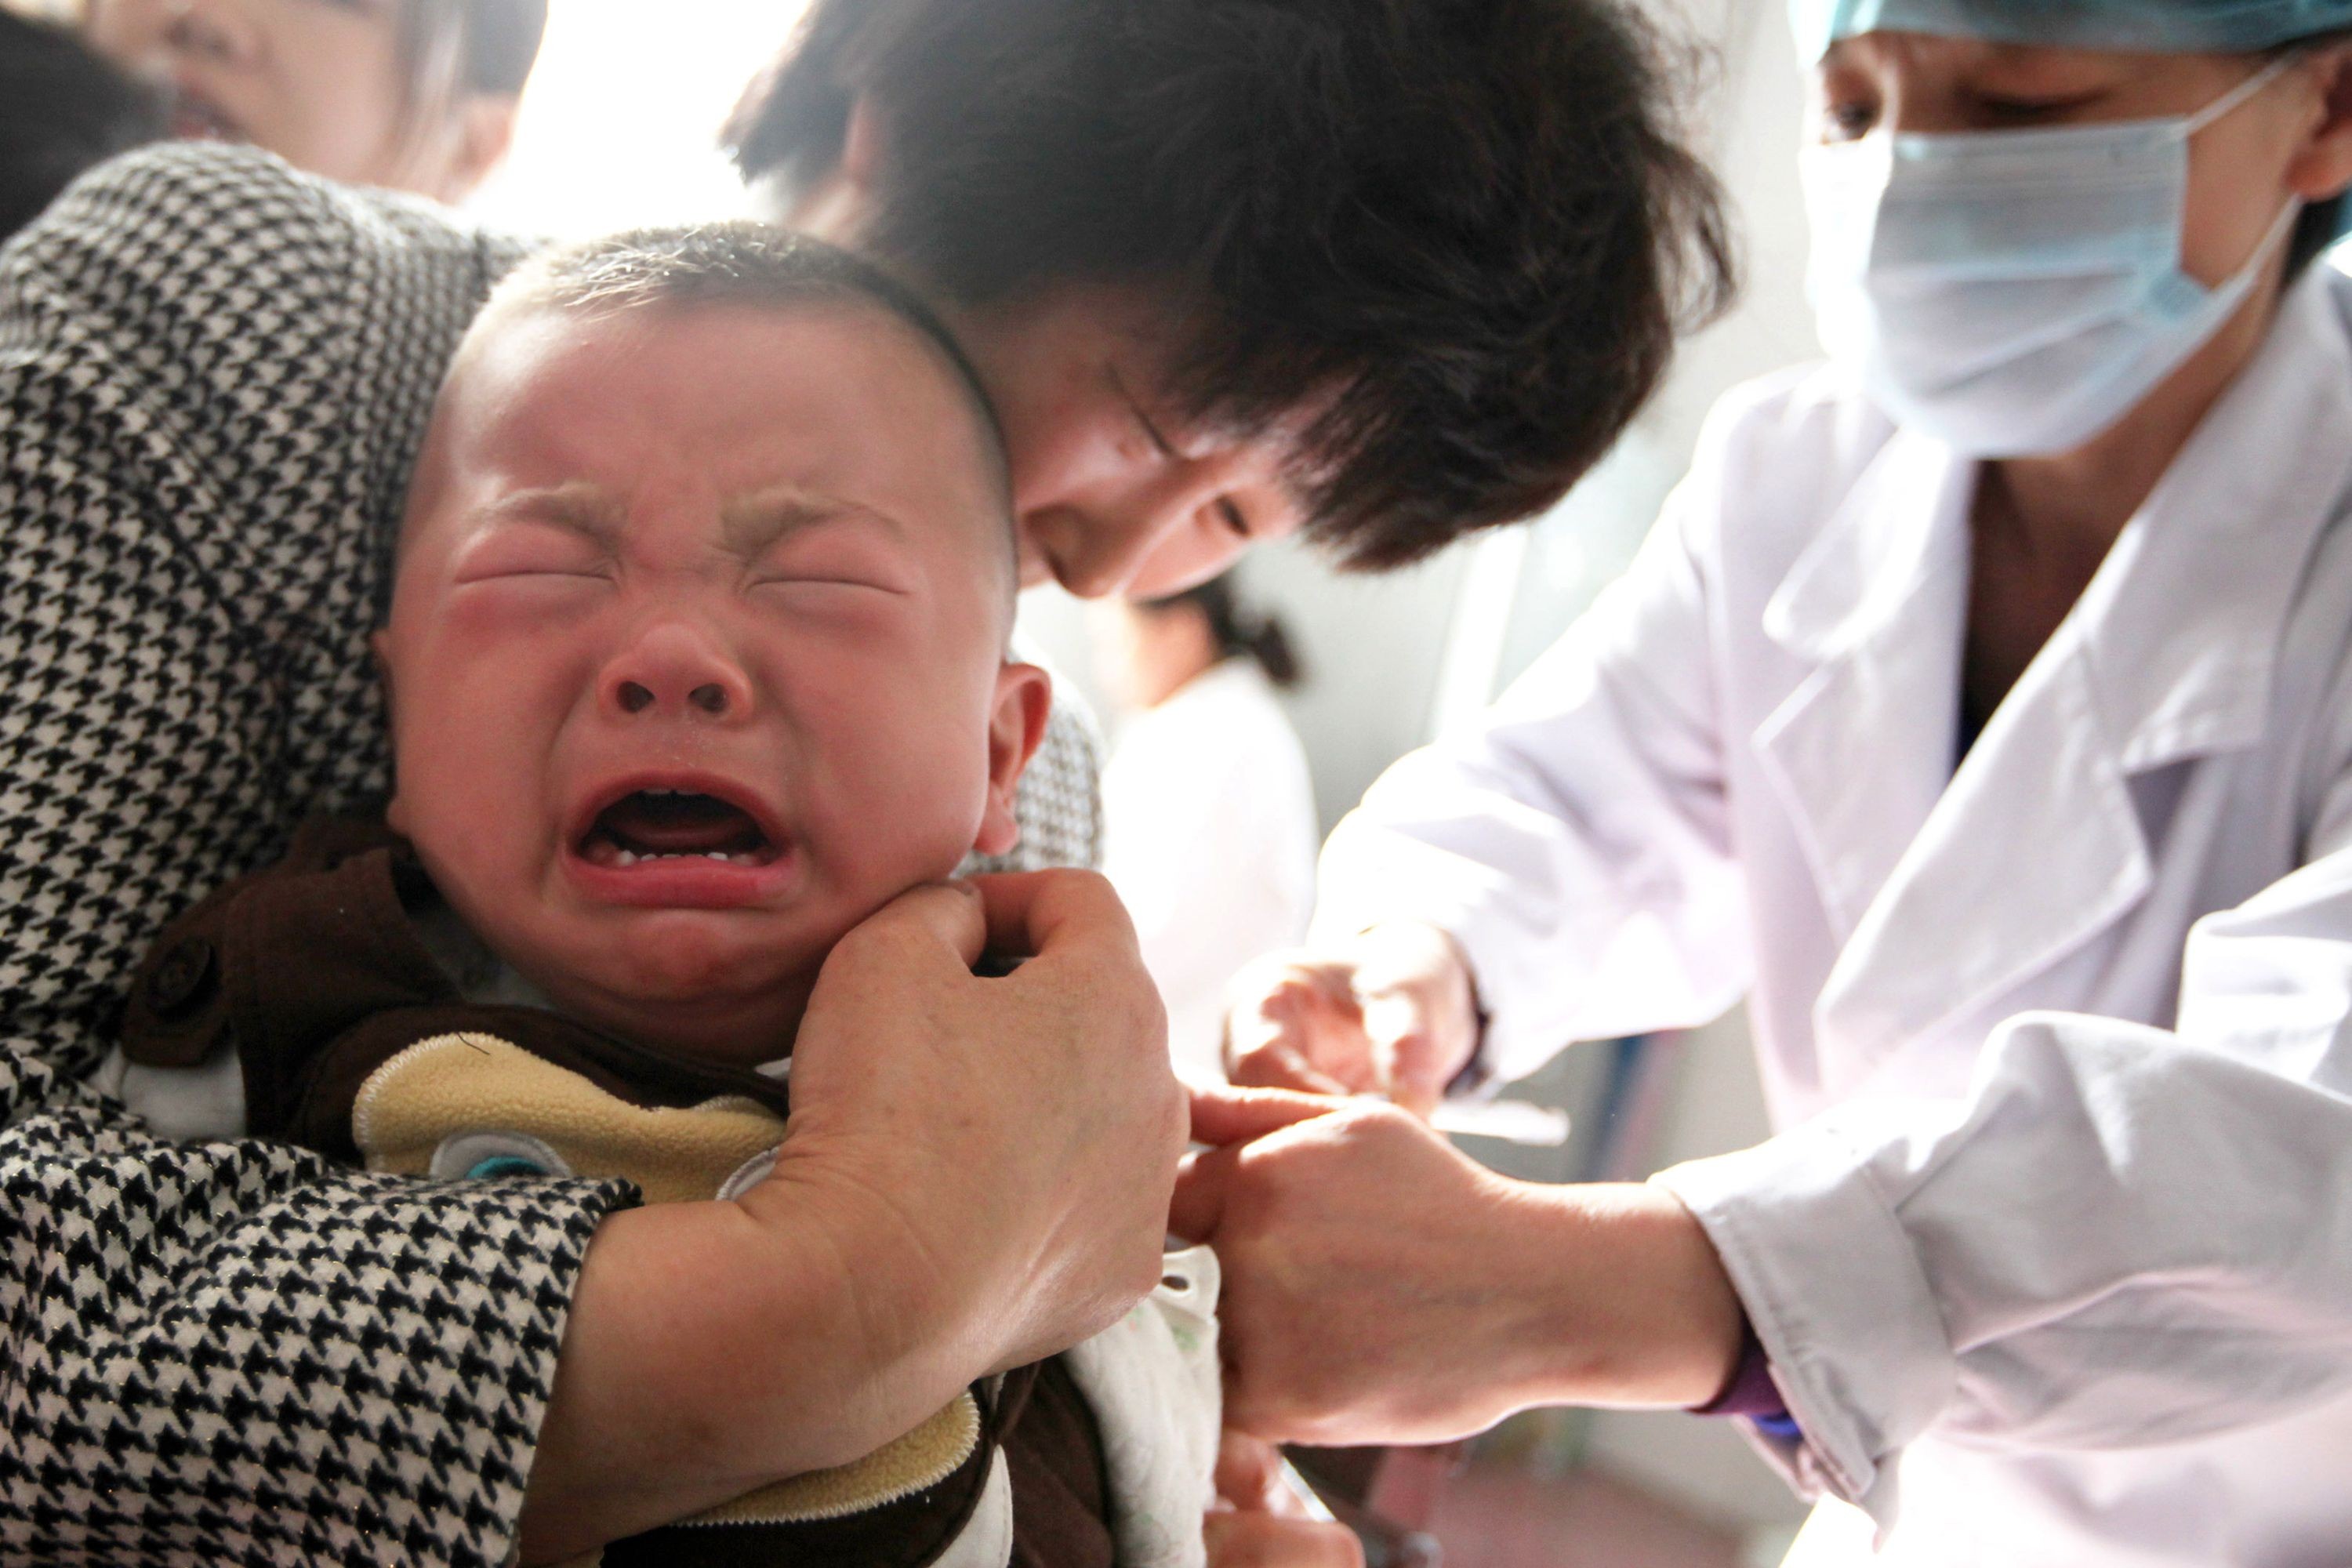 The latest vaccine scandal is China highlights an angst over supposed moral decay in the country. Photo: AFP